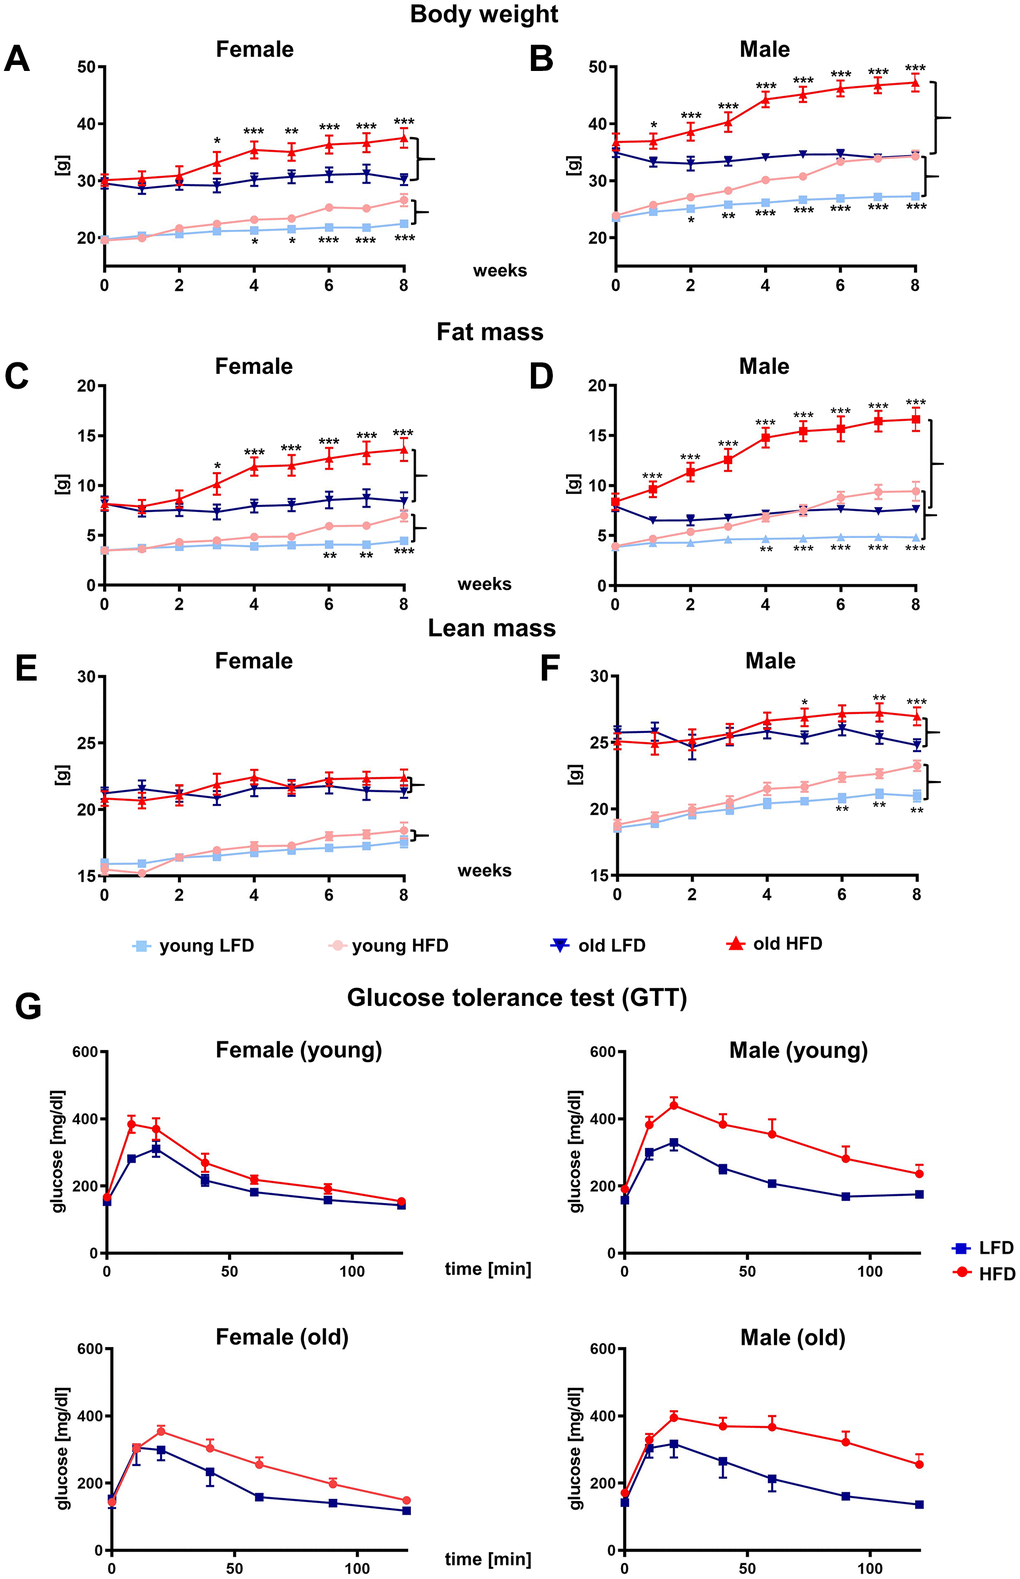 Effect of HFD vs. LFD on body weight (A, B), fat mass (C, D), lean mass (E, F) and glucose tolerance test (G) of B6 female (A, C, E, G) and male (B, D, F, G) mice. Body weight and body composition analyzed by nuclear magnetic resonance (NMR), were measured weekly during 8-week feeding study (n=192 total mice including: n=96 per LFD and n=96 per HFD). Data are the lsmean ±SE, asterisks indicate significant differences between animals fed HFD vs LFD *p